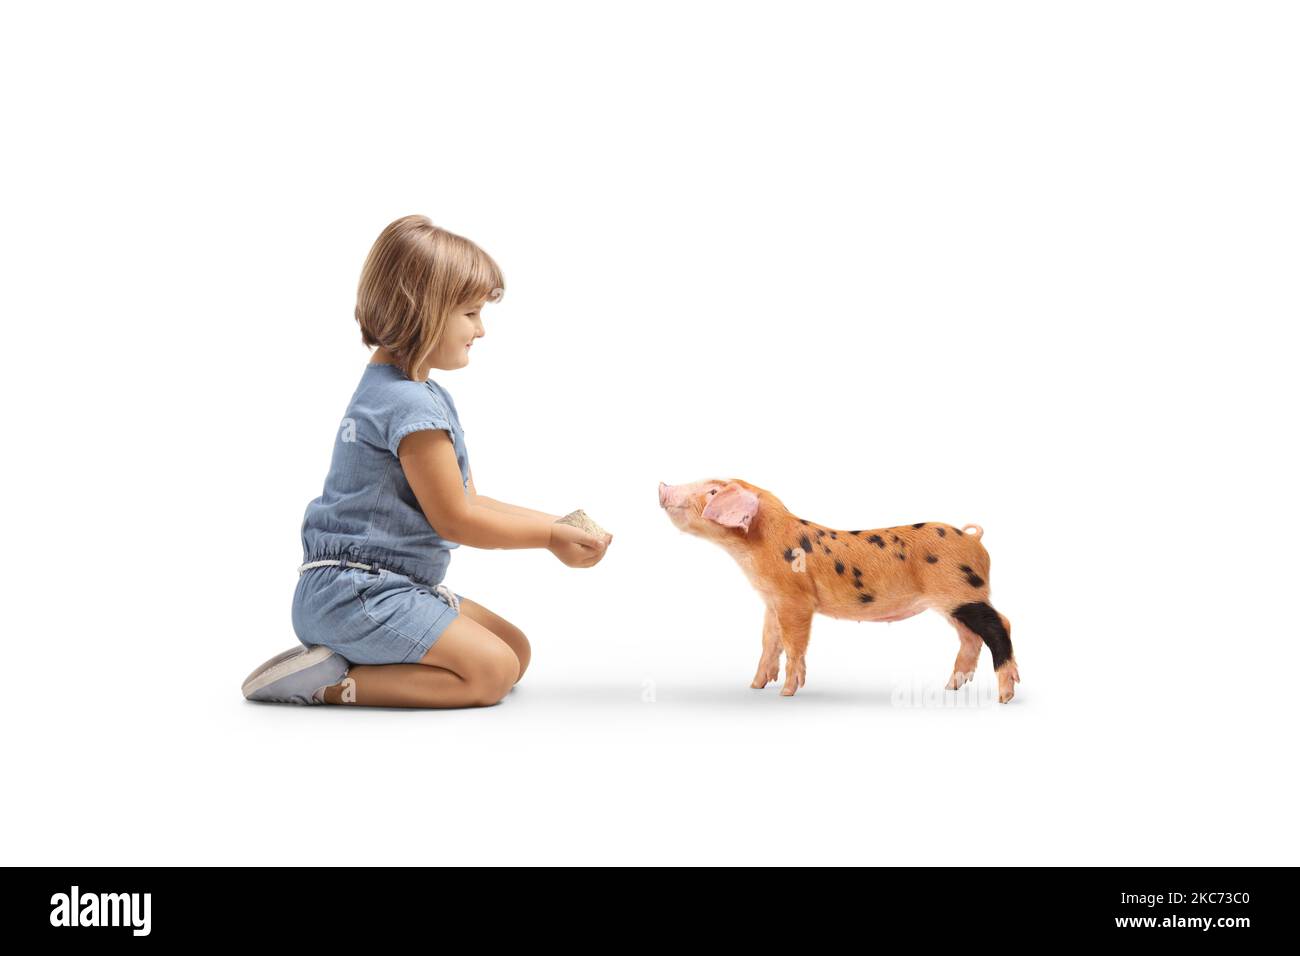 Little girl kneeling and feeding a piglet isolated on white background Stock Photo